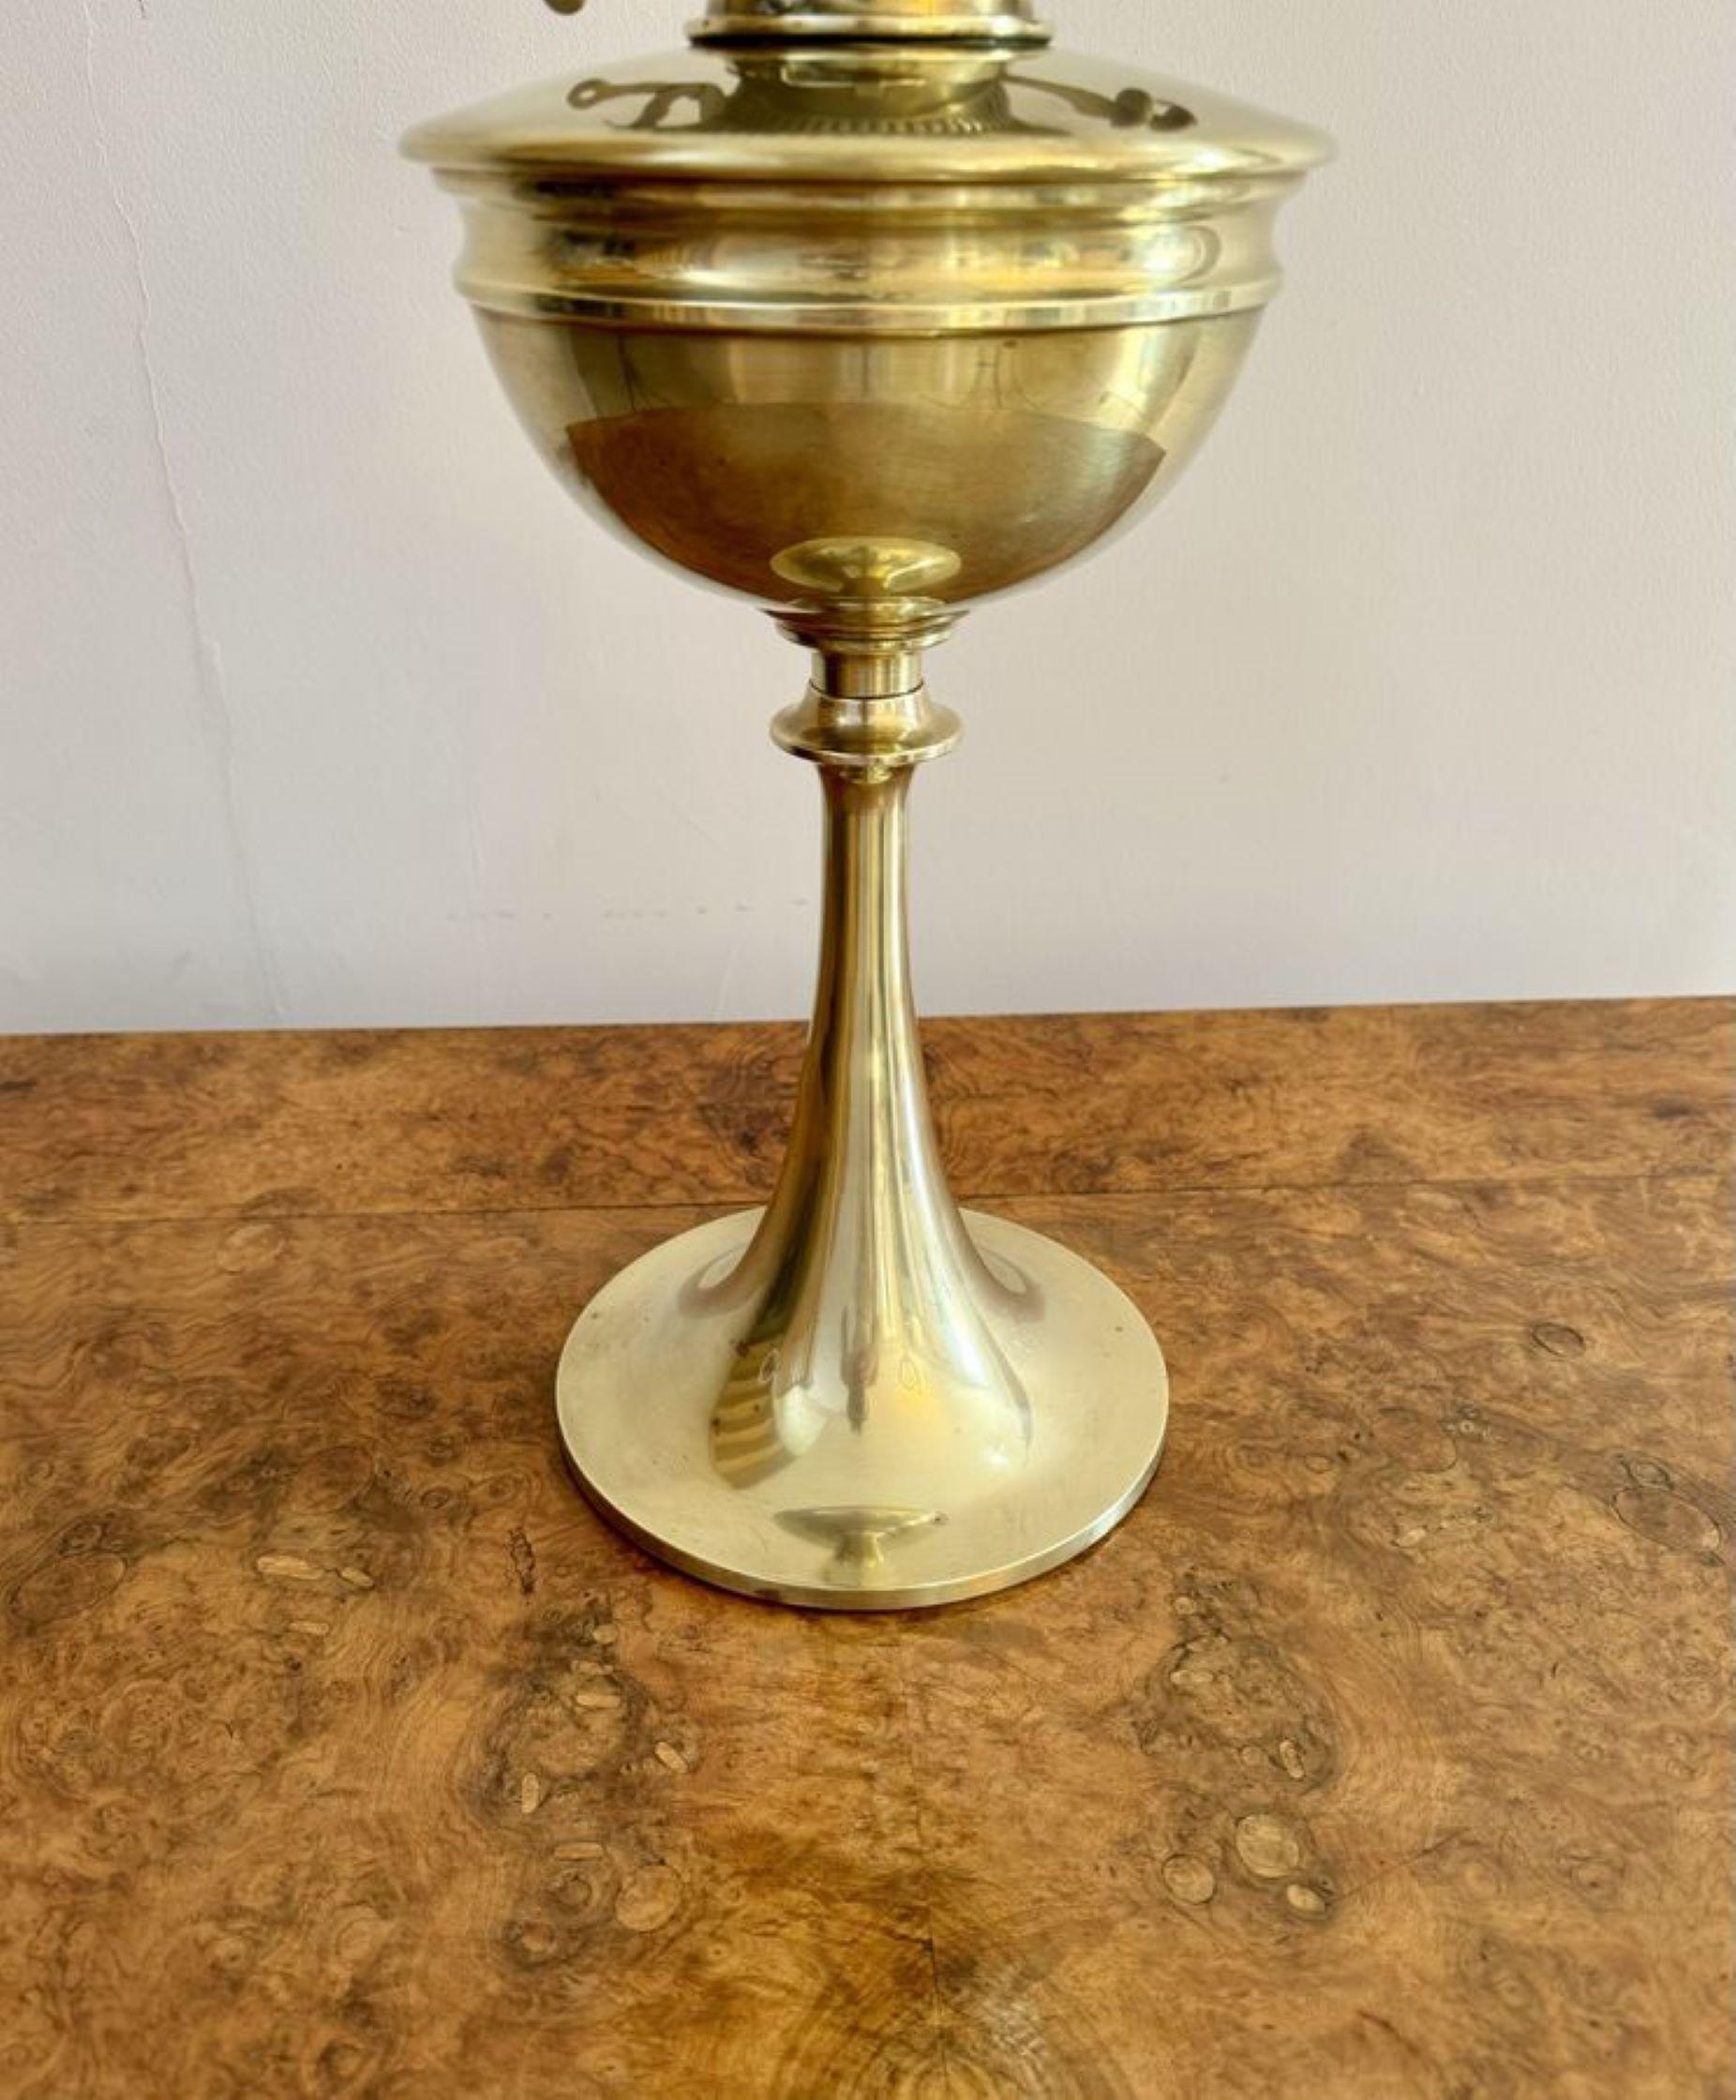 Wonderful quality antique Victorian brass oil lamp by Hinks and Sons, having a quality antique Victorian brass oil lamp, with a glass chimney and globe supported on a brass fluted shaped column. 

D. 1880